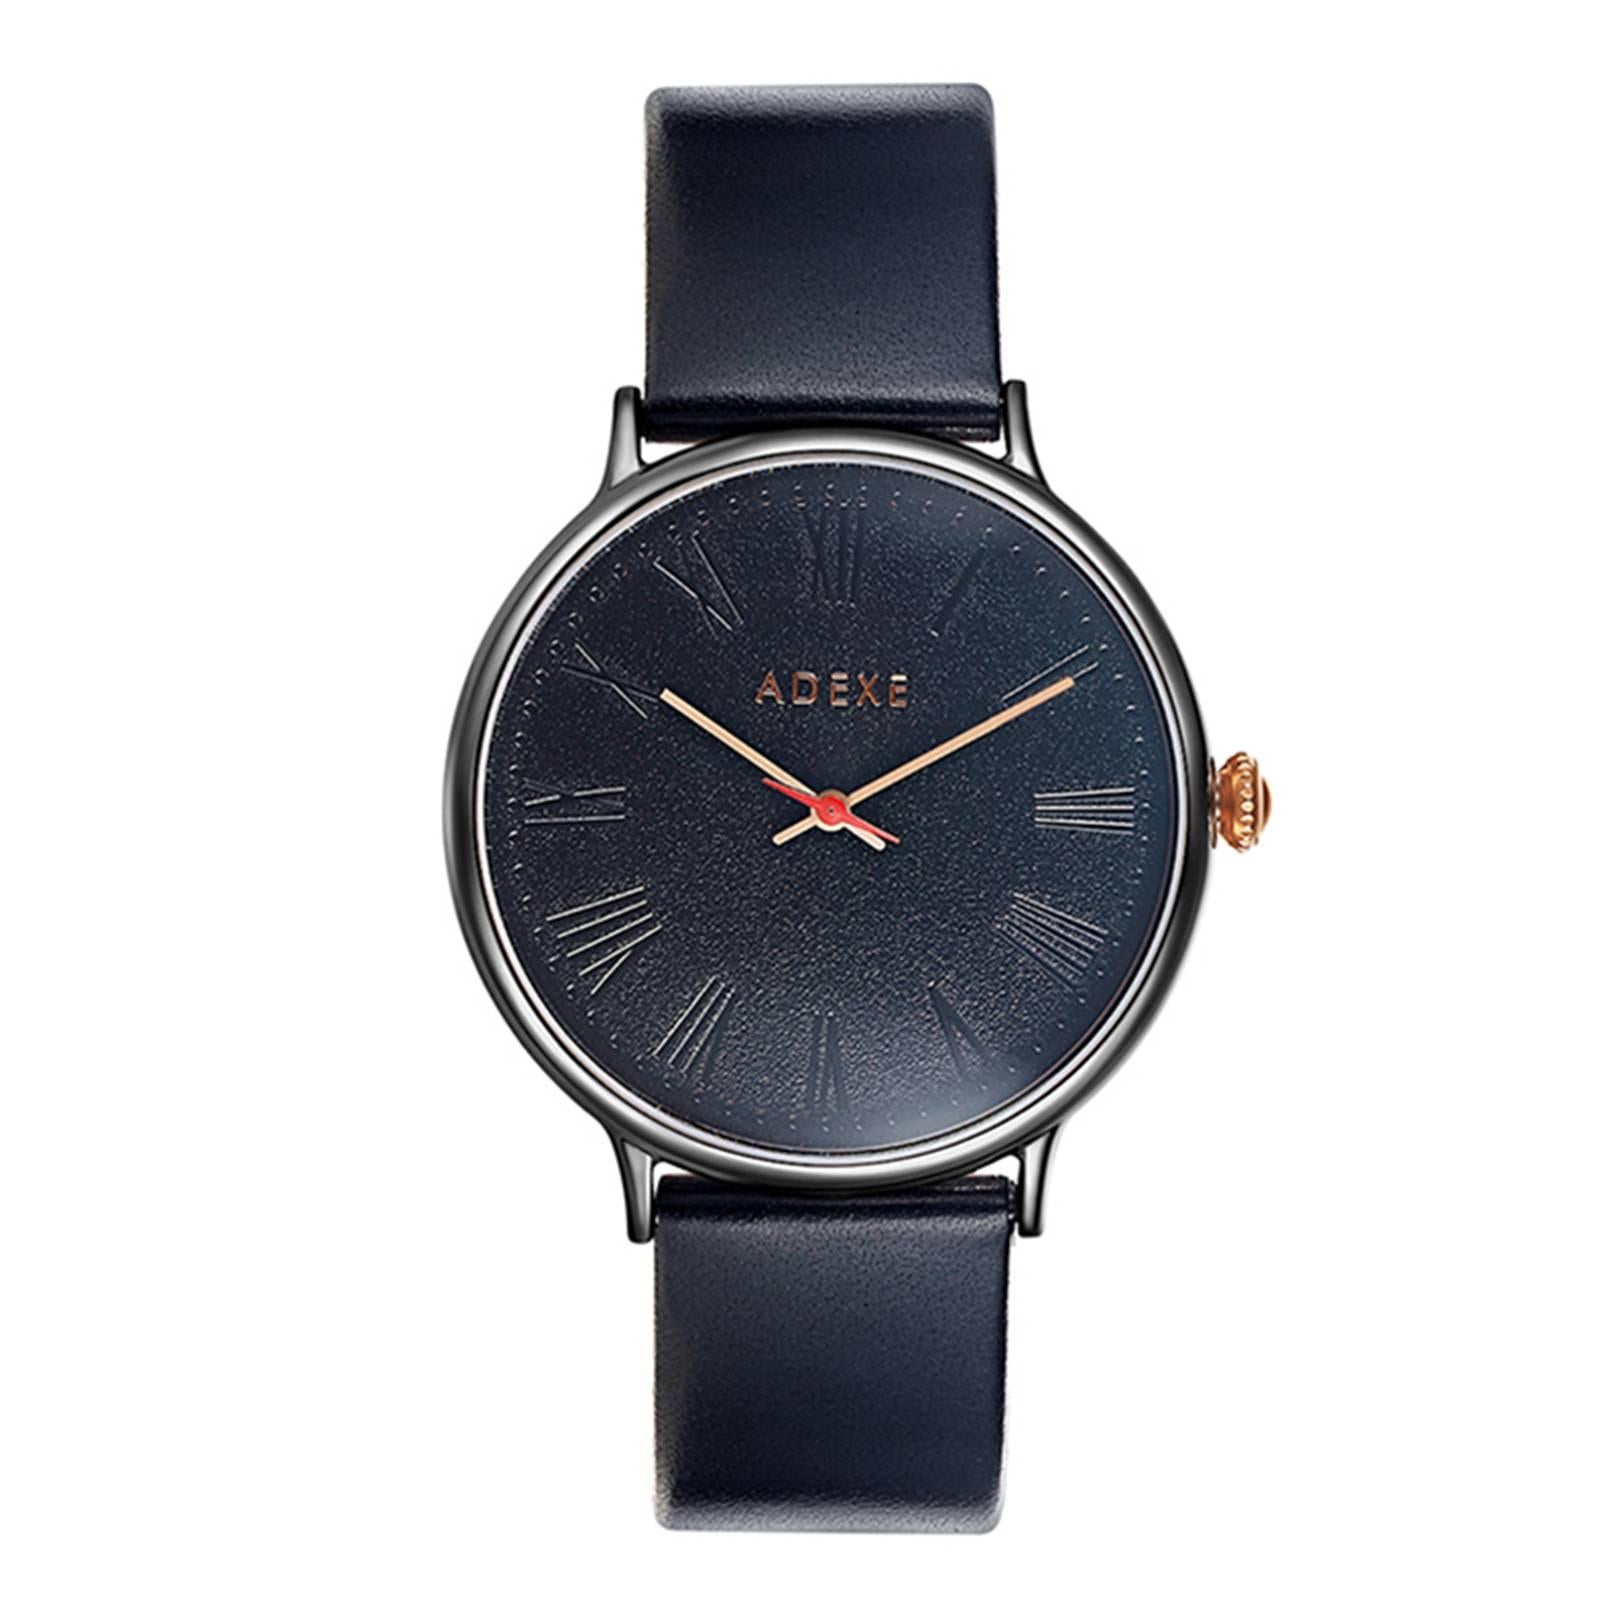 Sphère Black and Black Genuine Italian Leather Doomed Glass Lifestyle Watch